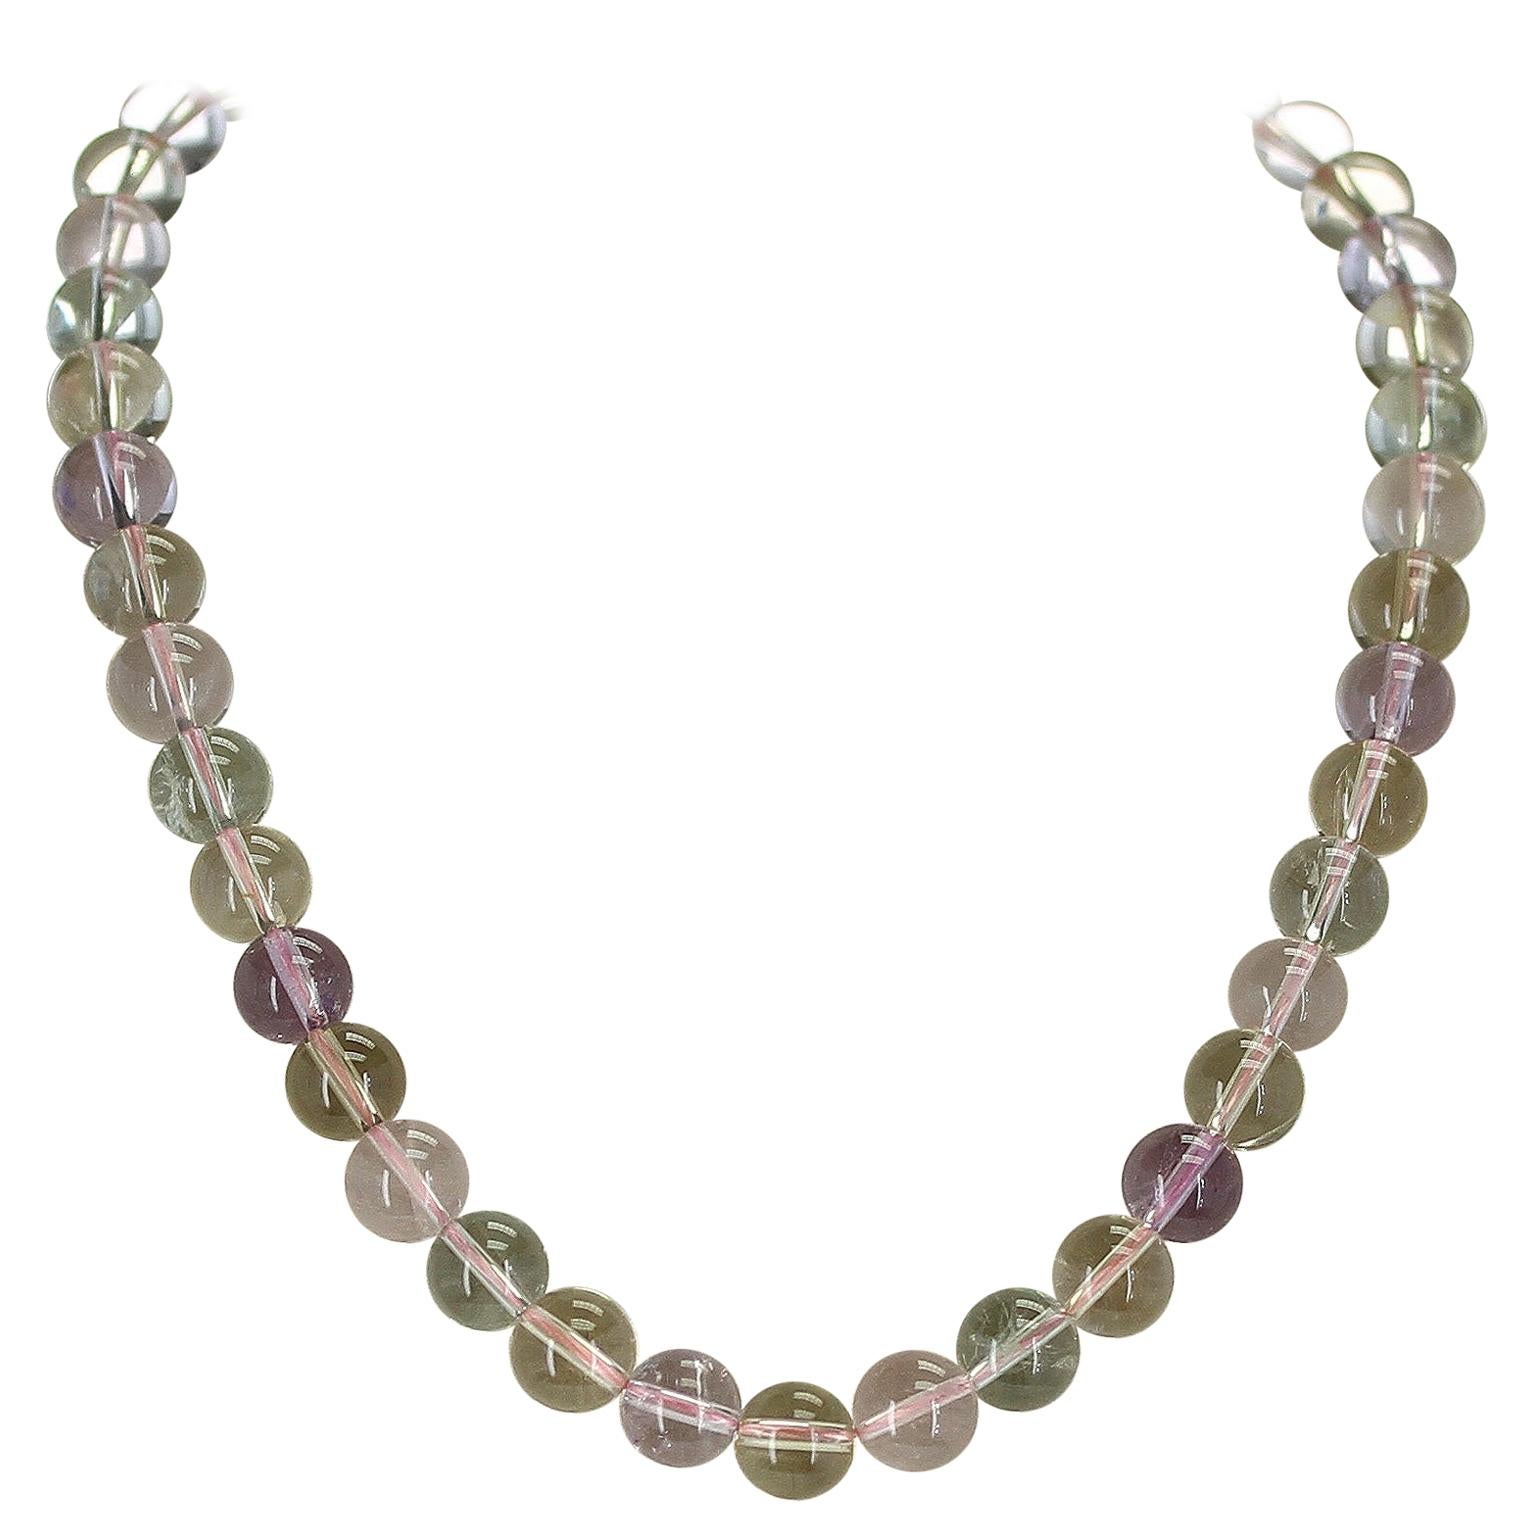 Genuine and Natural Multicolored Round Plain Kunzite Beads Necklace, 14 Karat For Sale